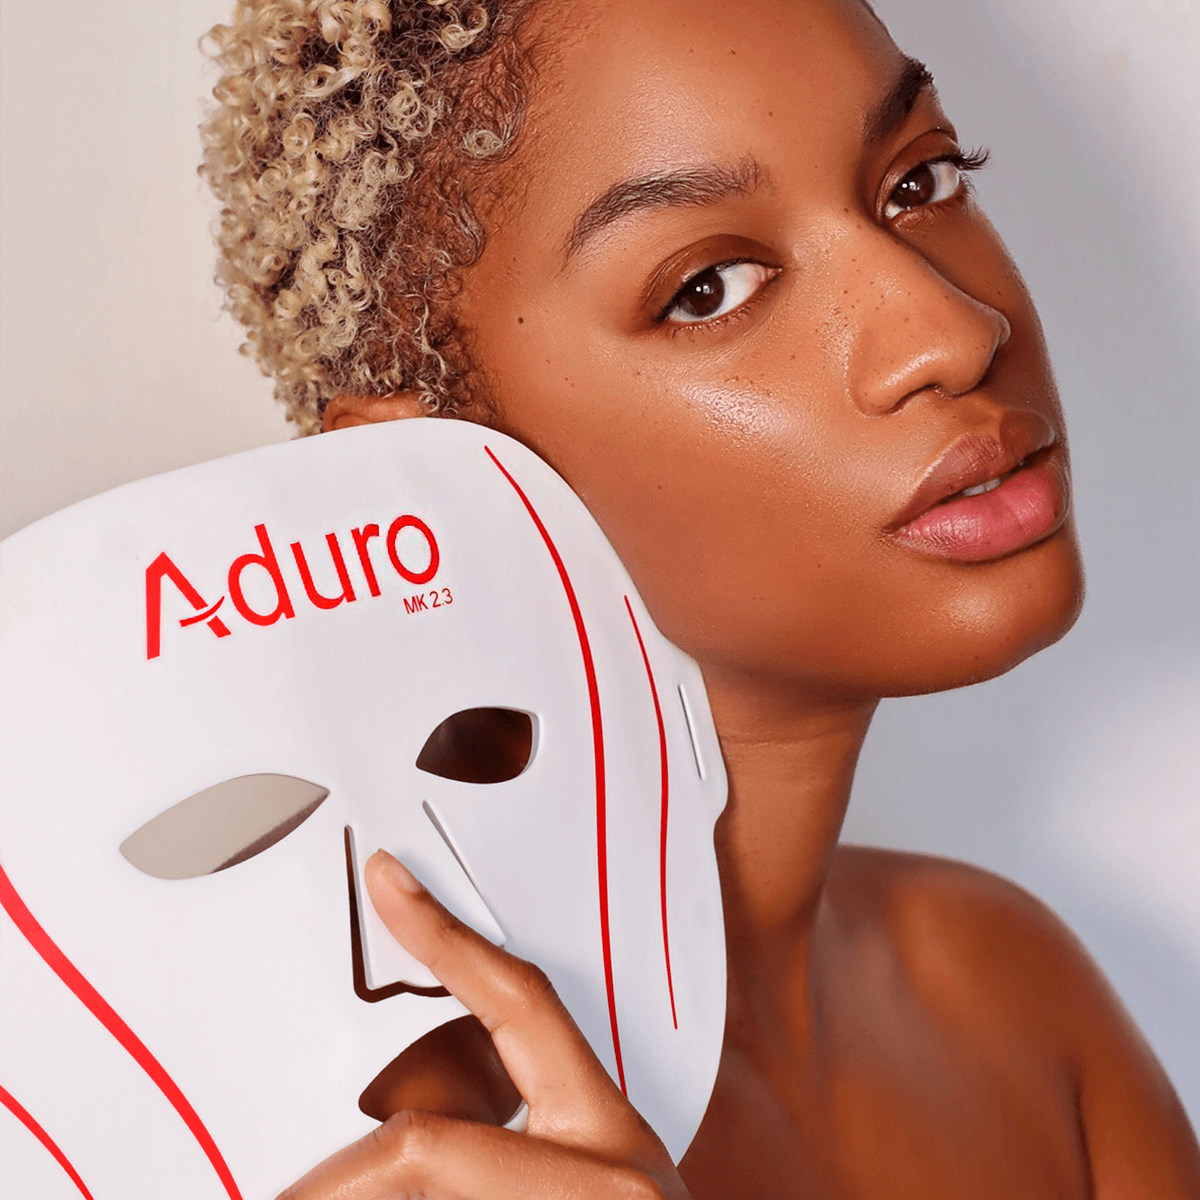 Aduro Facial mask v1.0 Wrinkle reduction Anti-aging treatment Collagen production